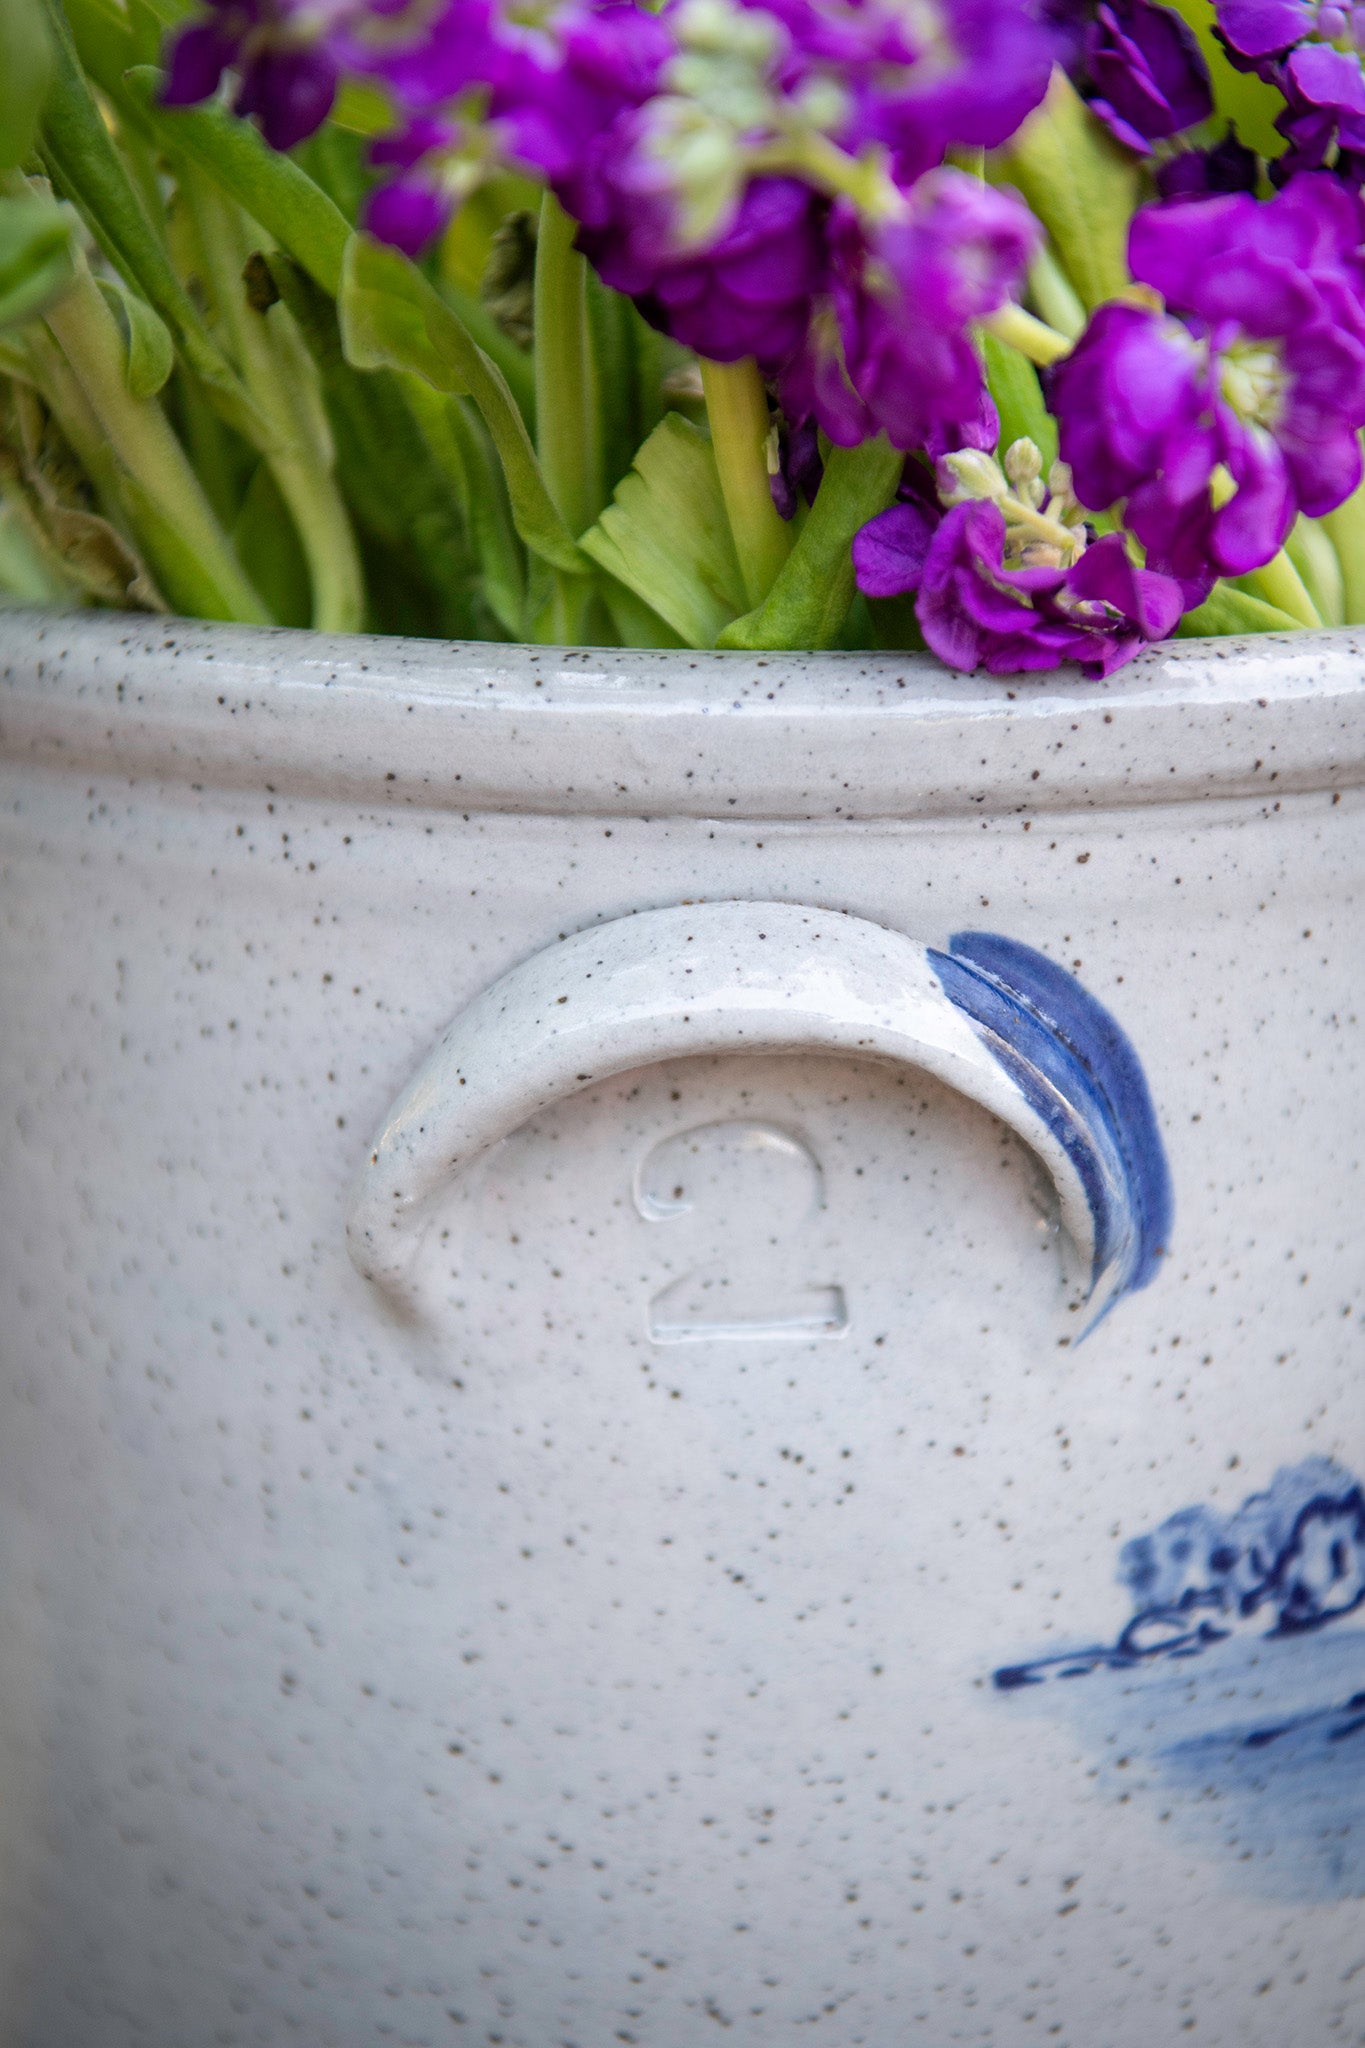 Limited-Edition '50 Years on the Prairie' 2 Gallon Crock